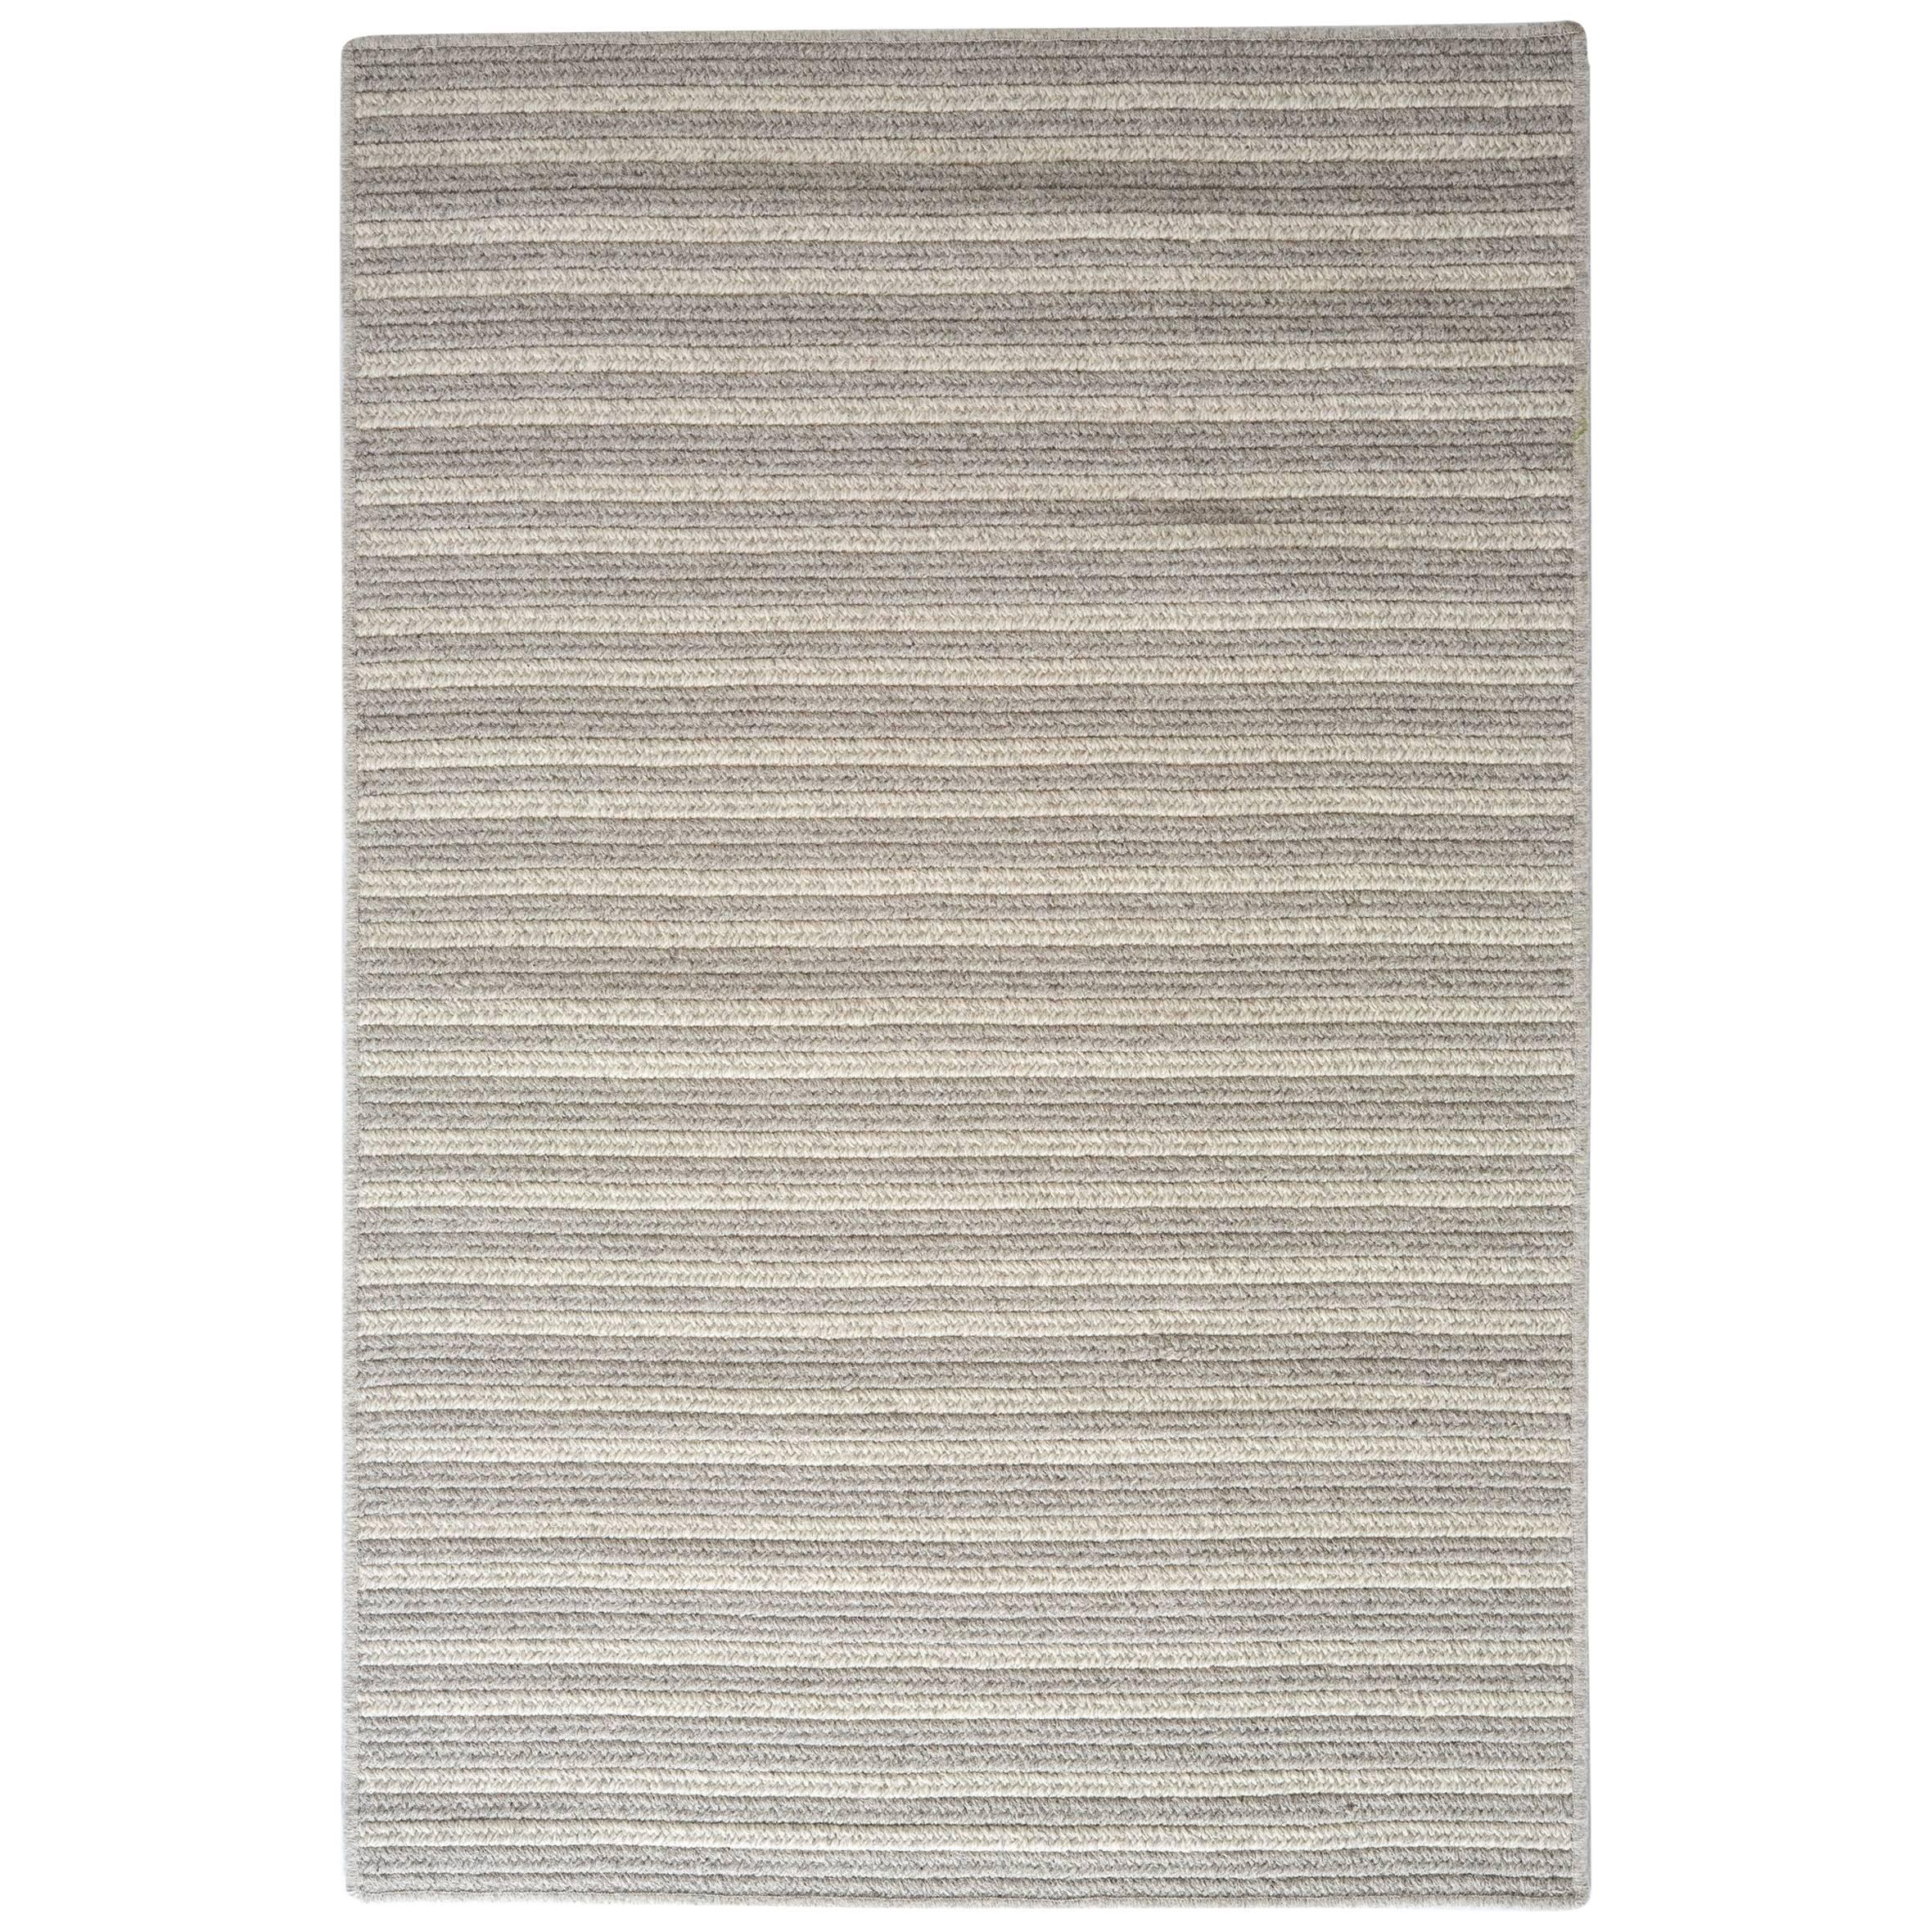 Natural Woven Wool Rug in Light Grey is Custom Crafted in USA, Reversible, Cayo For Sale